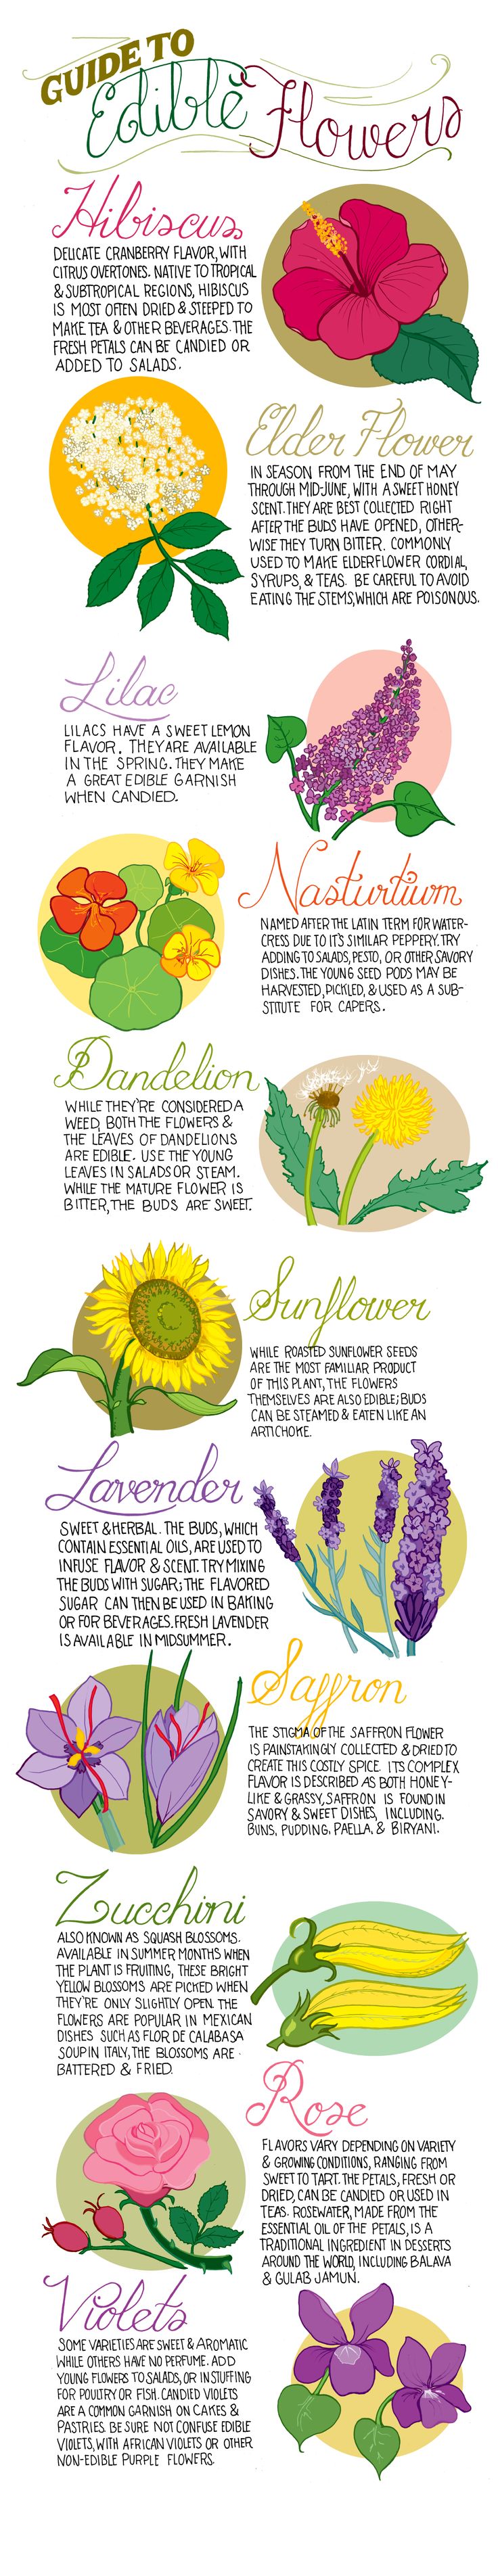 Guide to Edible Flowers Blog